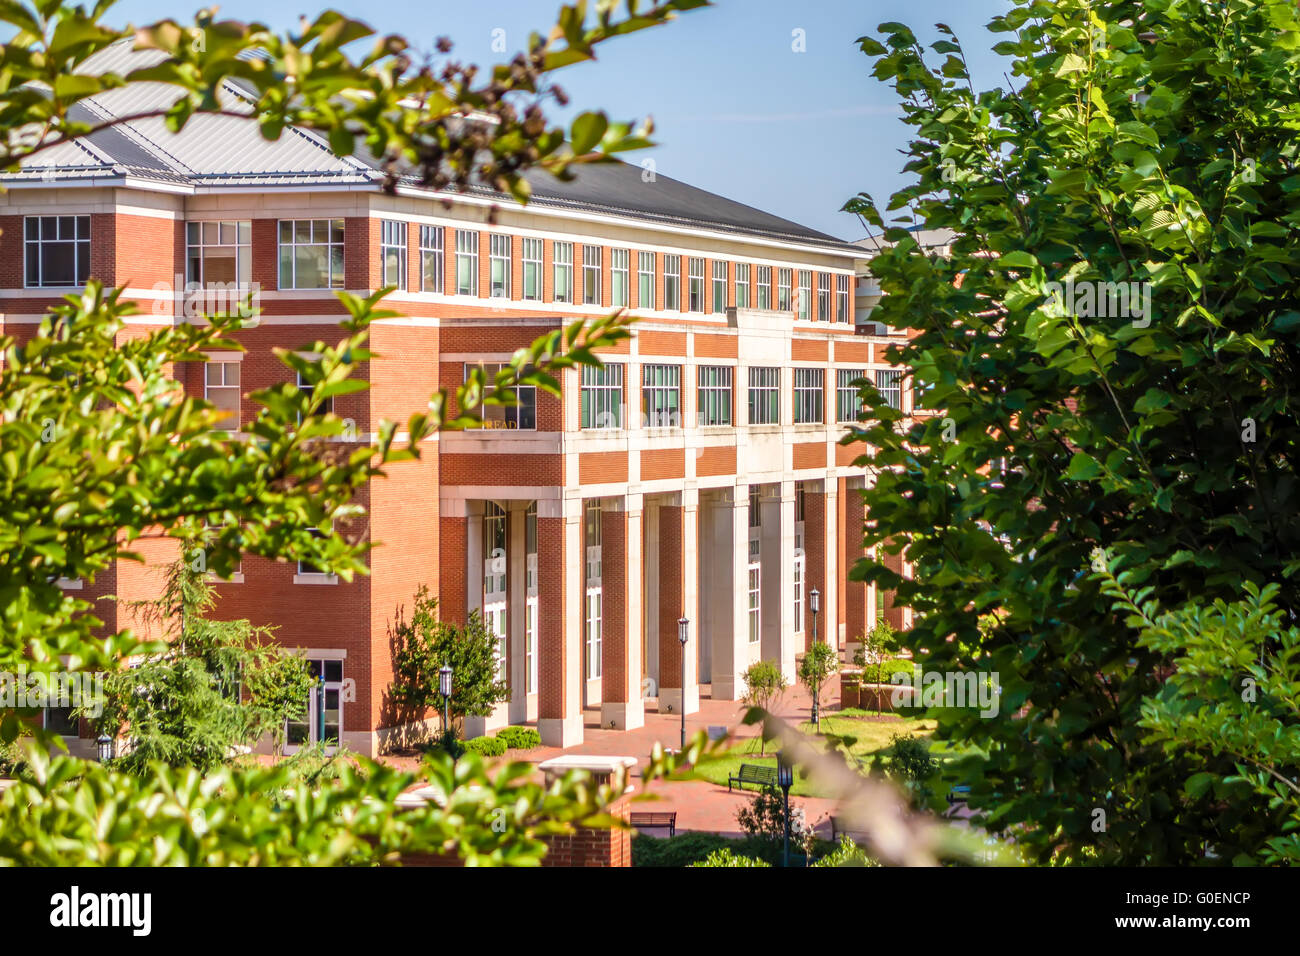 modern and historic architecture at college campus Stock Photo